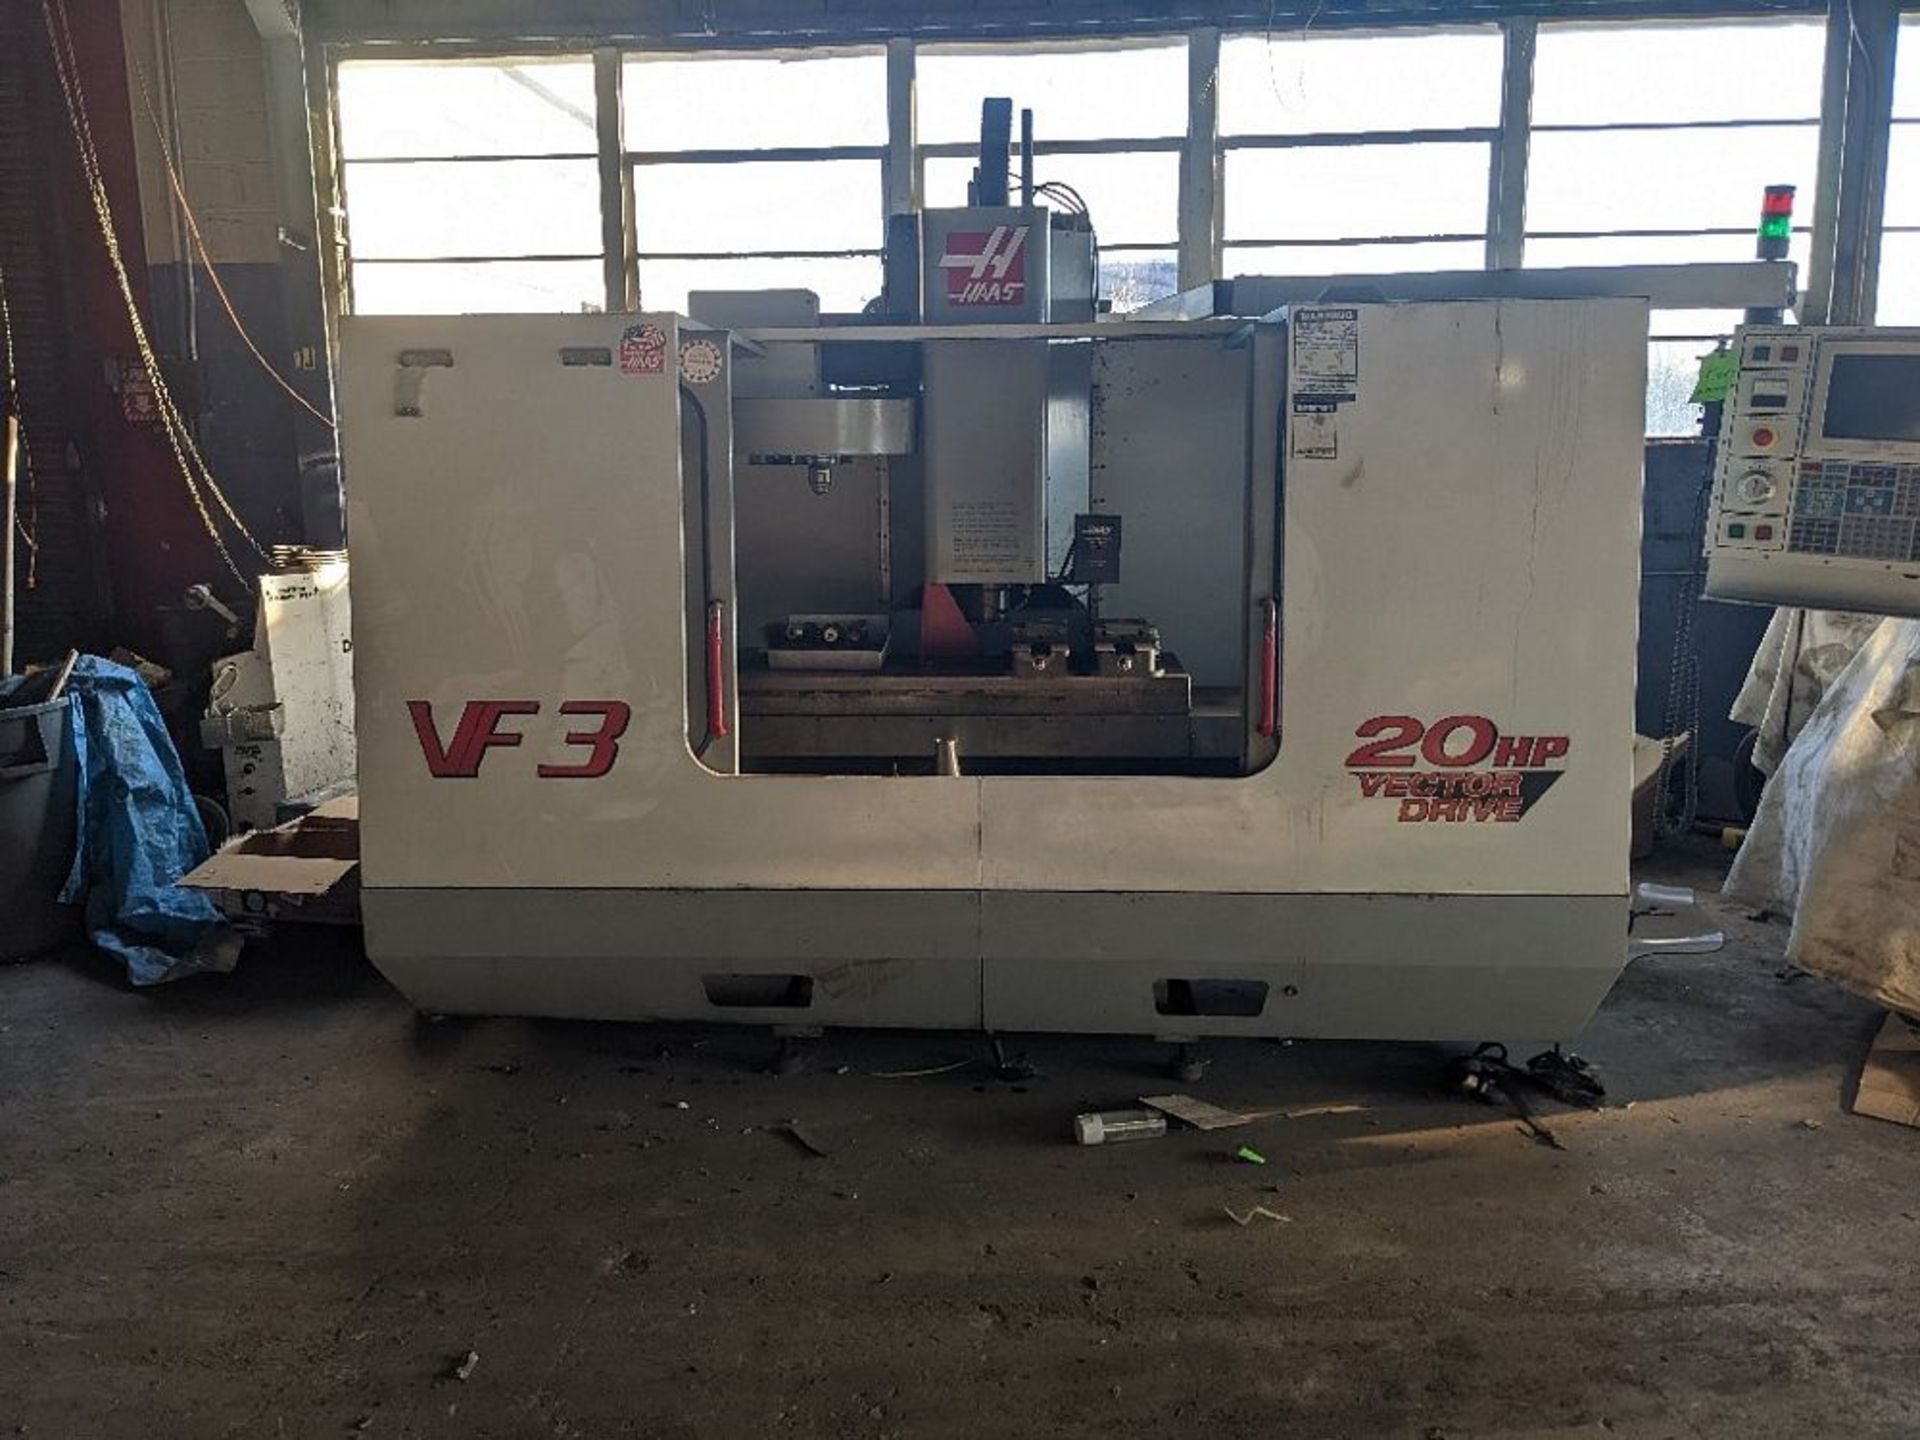 Haas VFS CNC Mill - X Axis Travel: 40" - Y Axis Travel: 20" - Z Axis Travel: 25" - Rapid Rate X